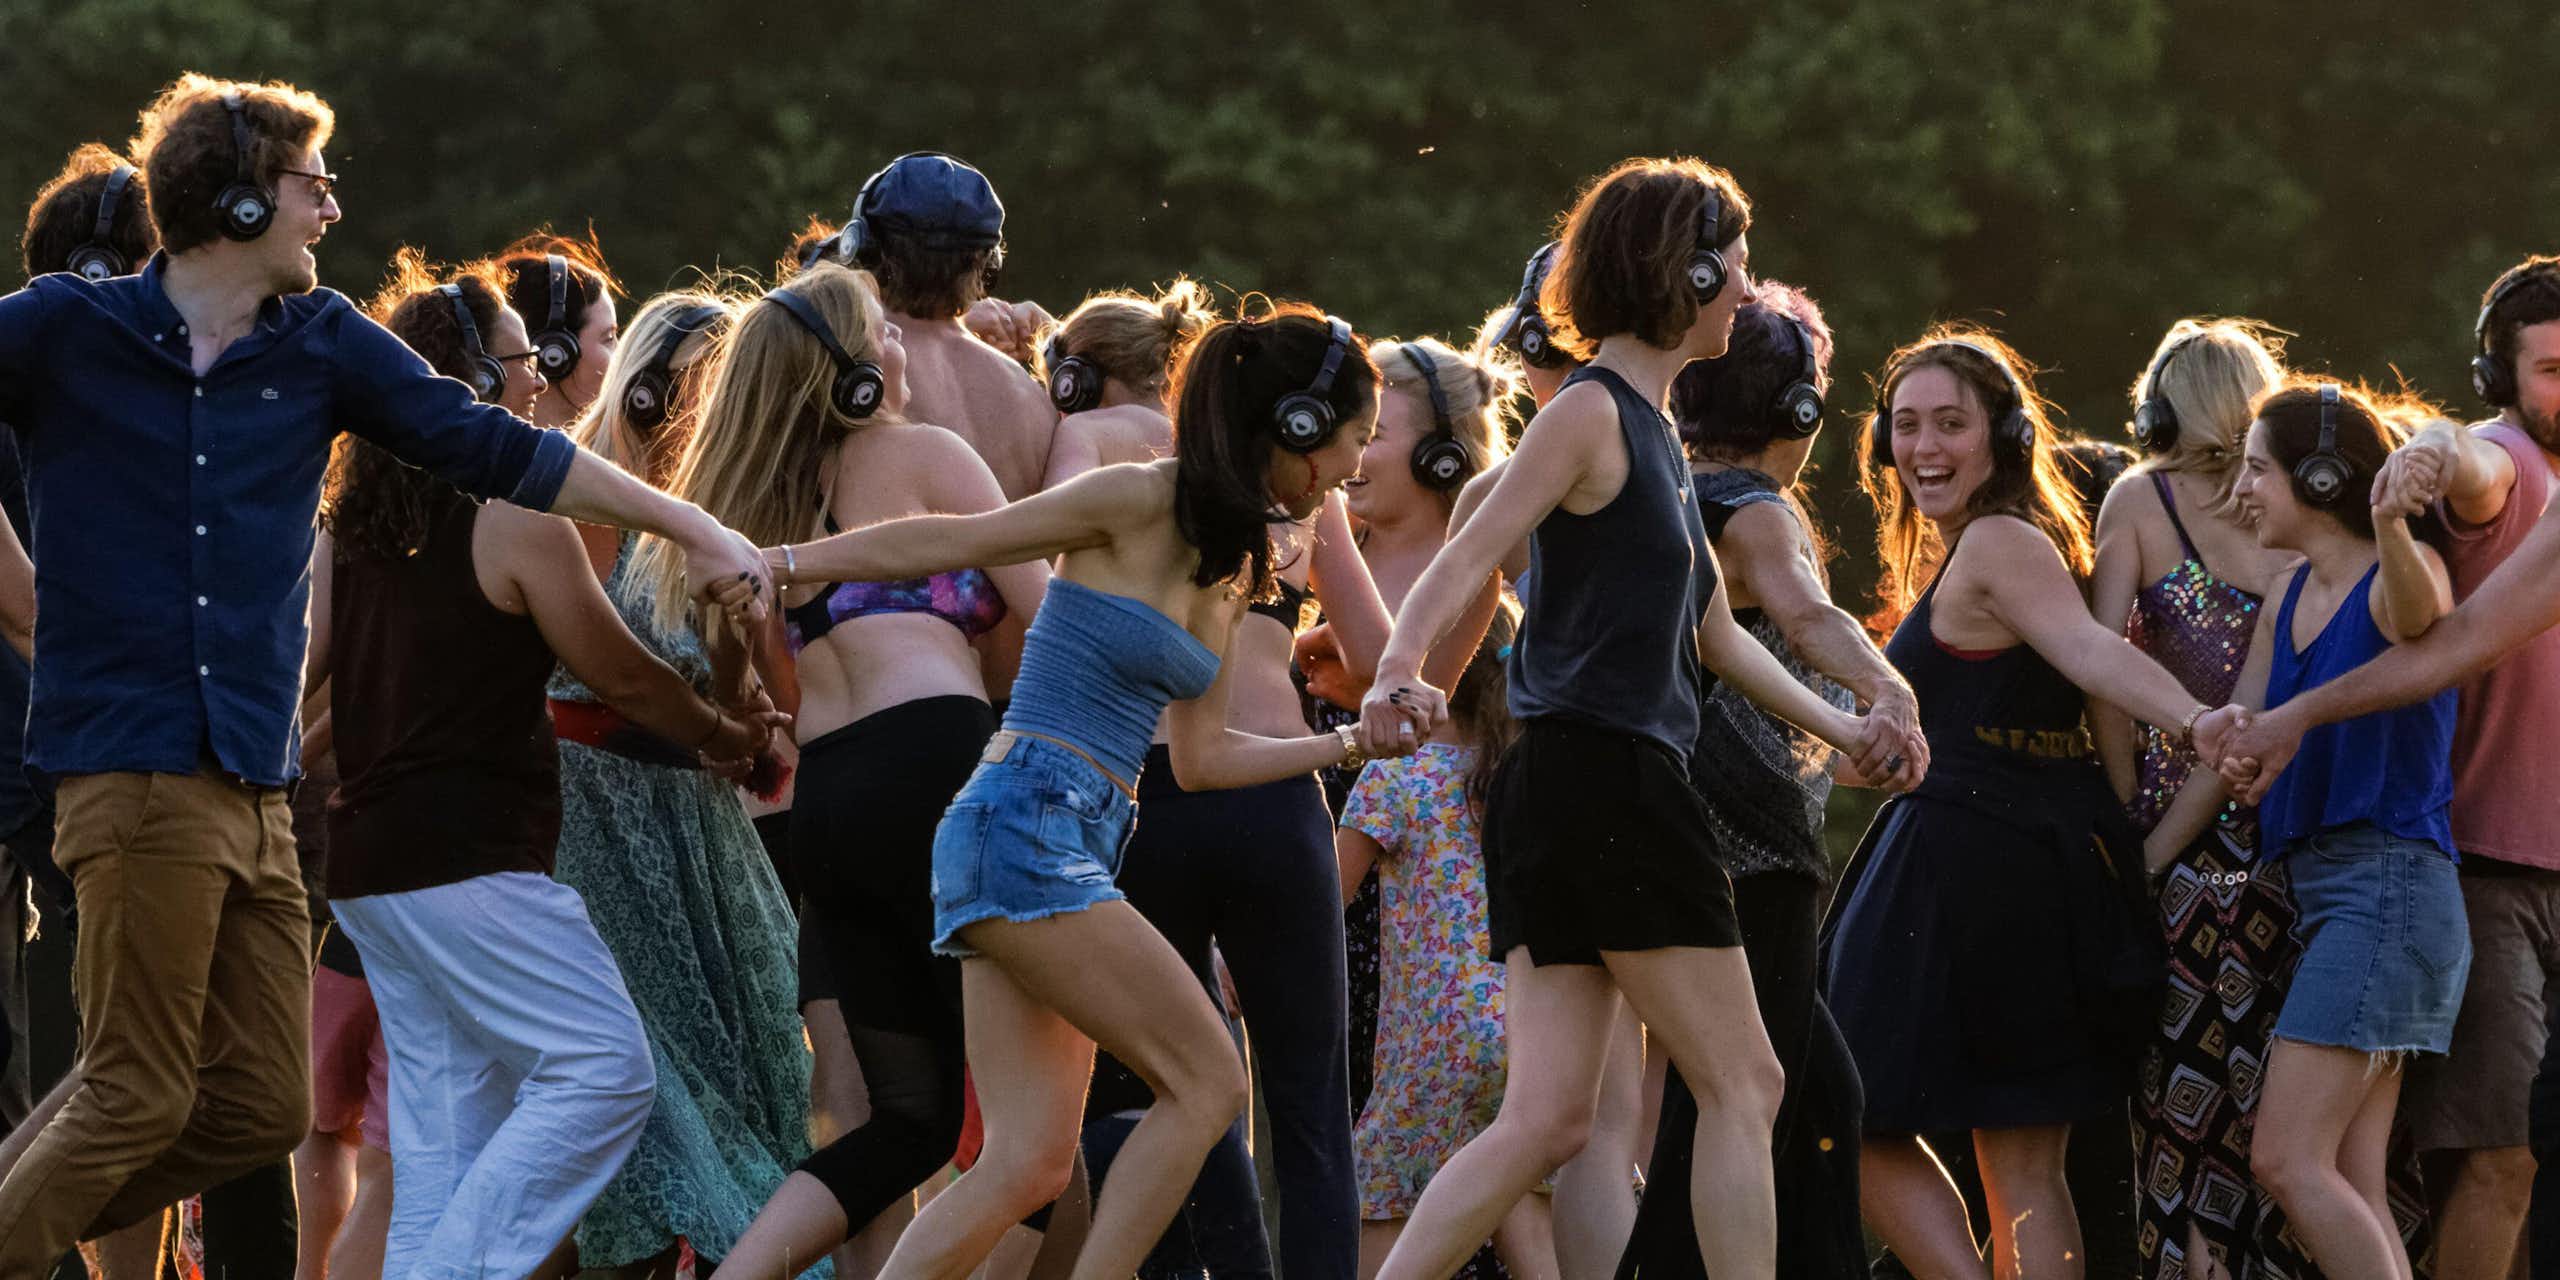 A group of young people outdoors at a festival dancing to a silent disco.